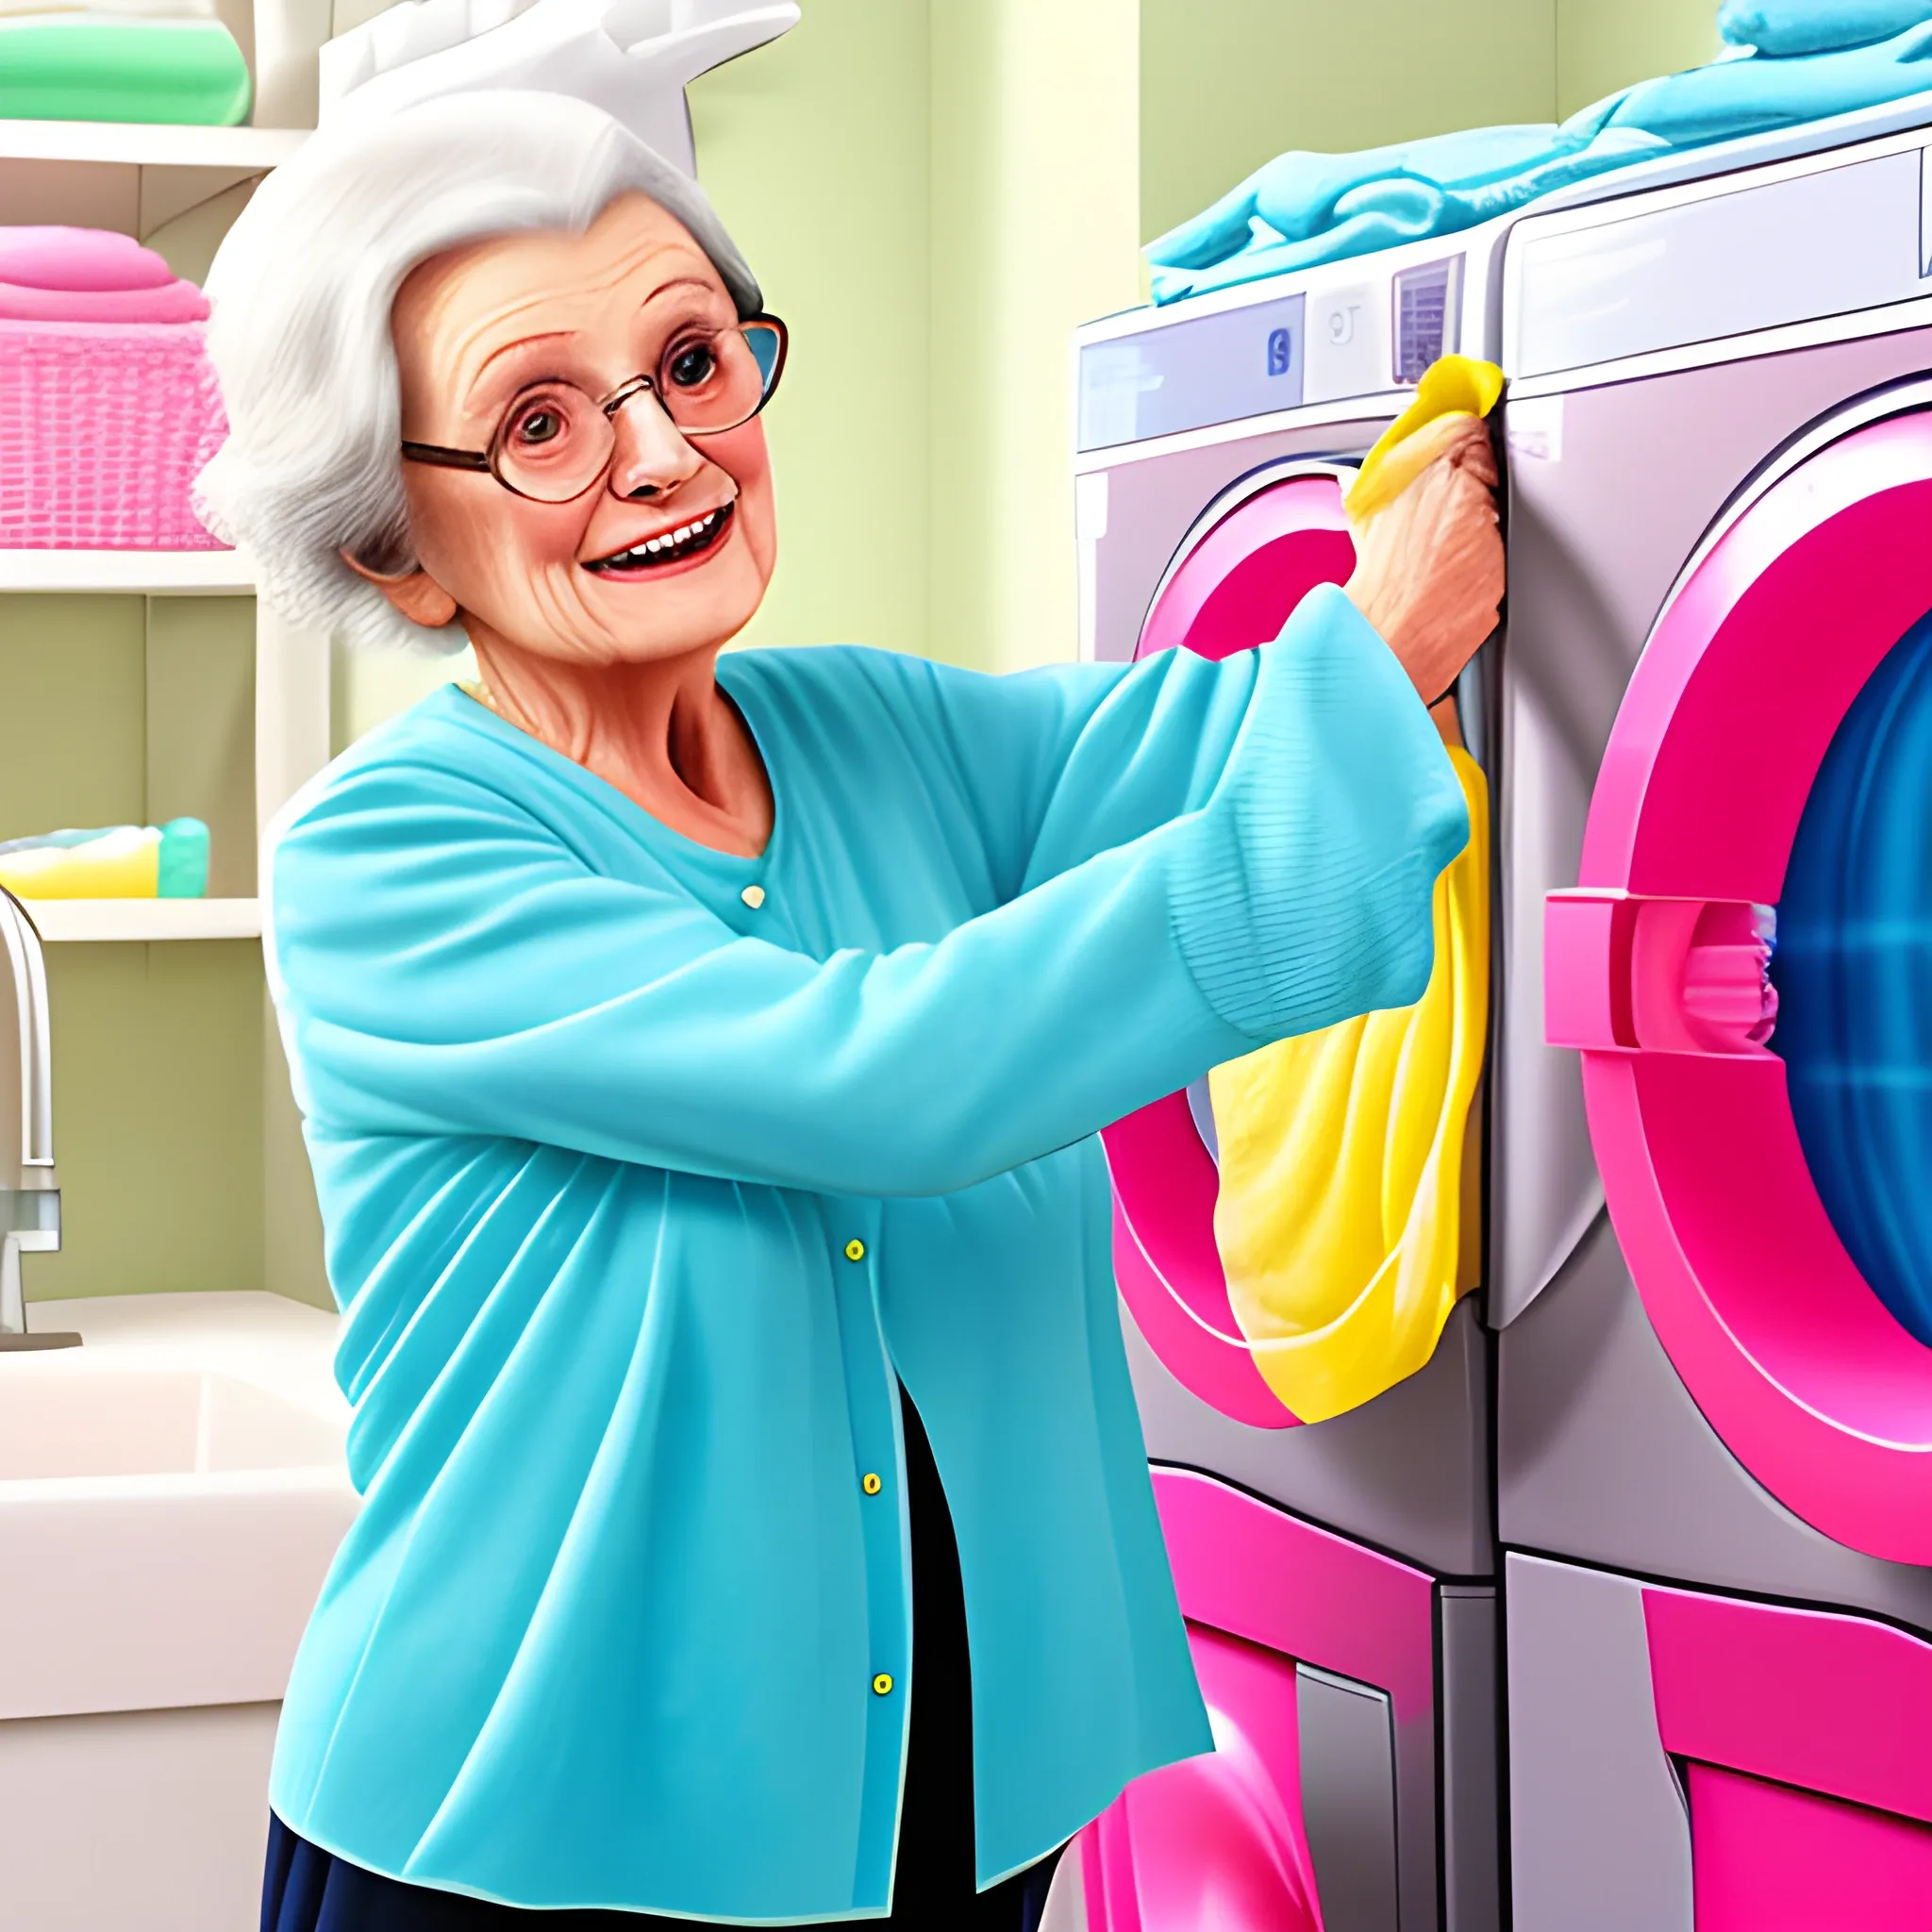 Create a label for a clothes detergent featuring a modern, whimsical old lady persuading to do laundry. use saturated bright colours., Cartoon